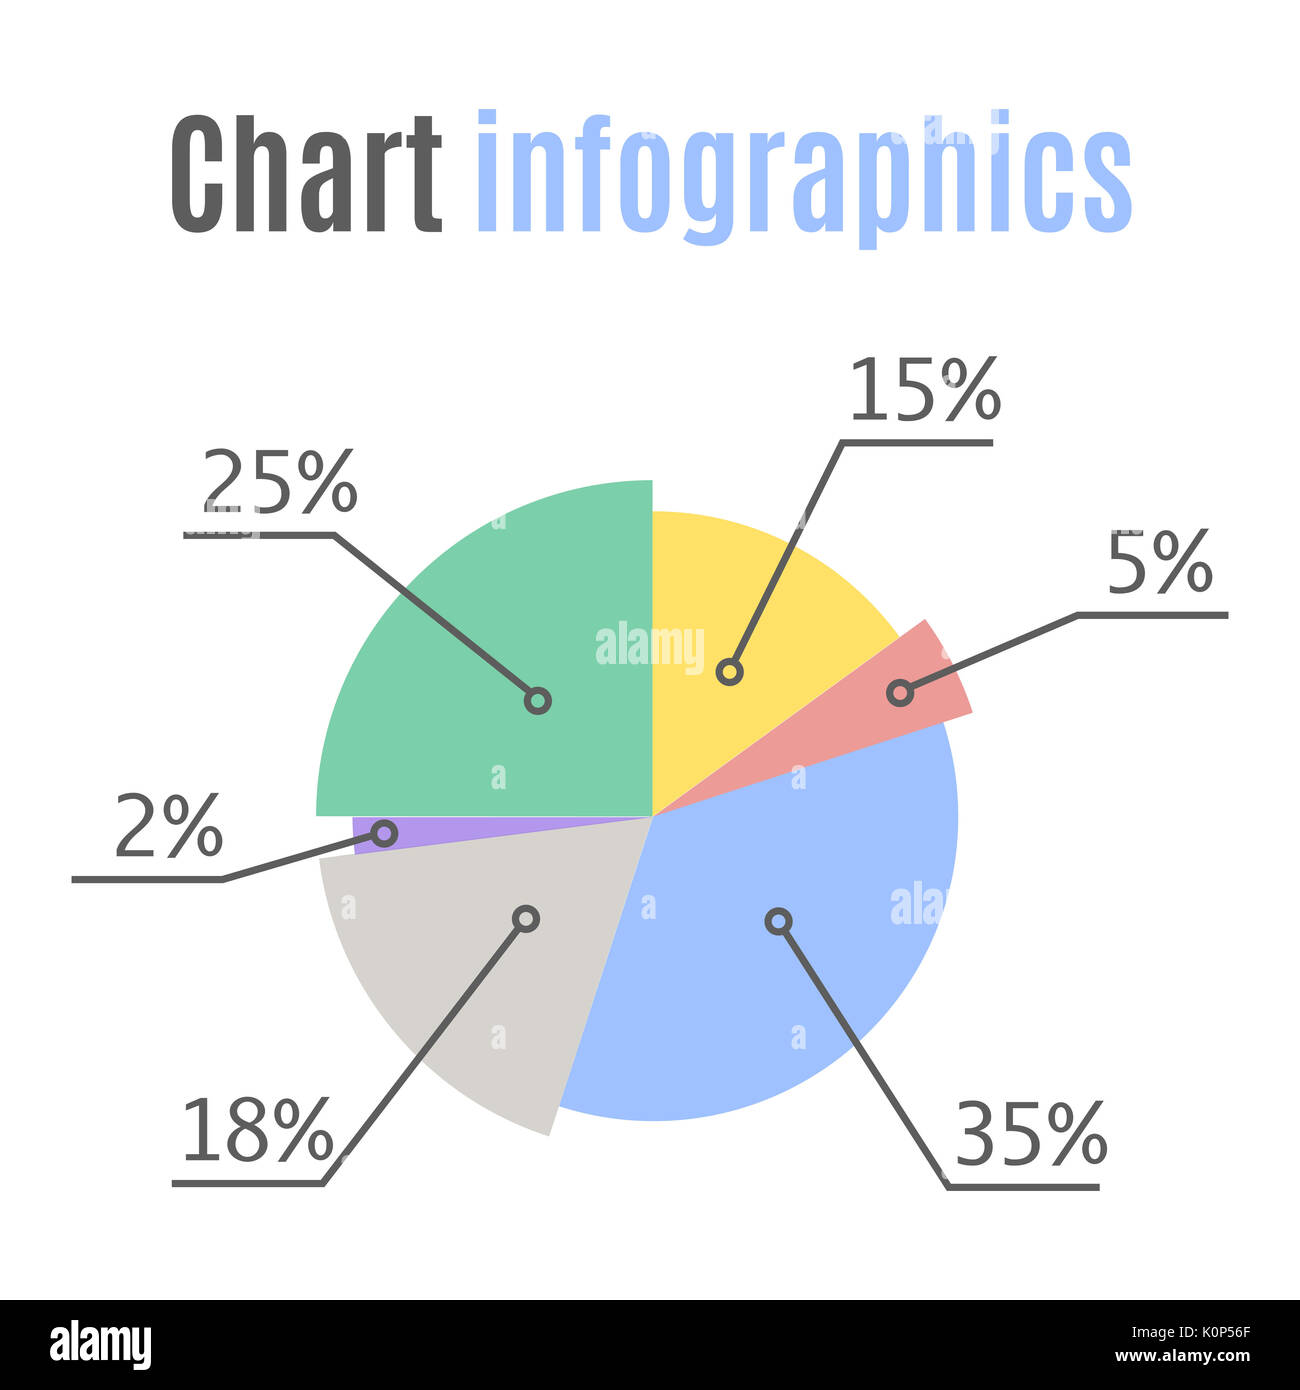 Pie chart statistic concept. Business flow process diagram. Infographic elements for presentation. Percentage infographics. Stock Photo